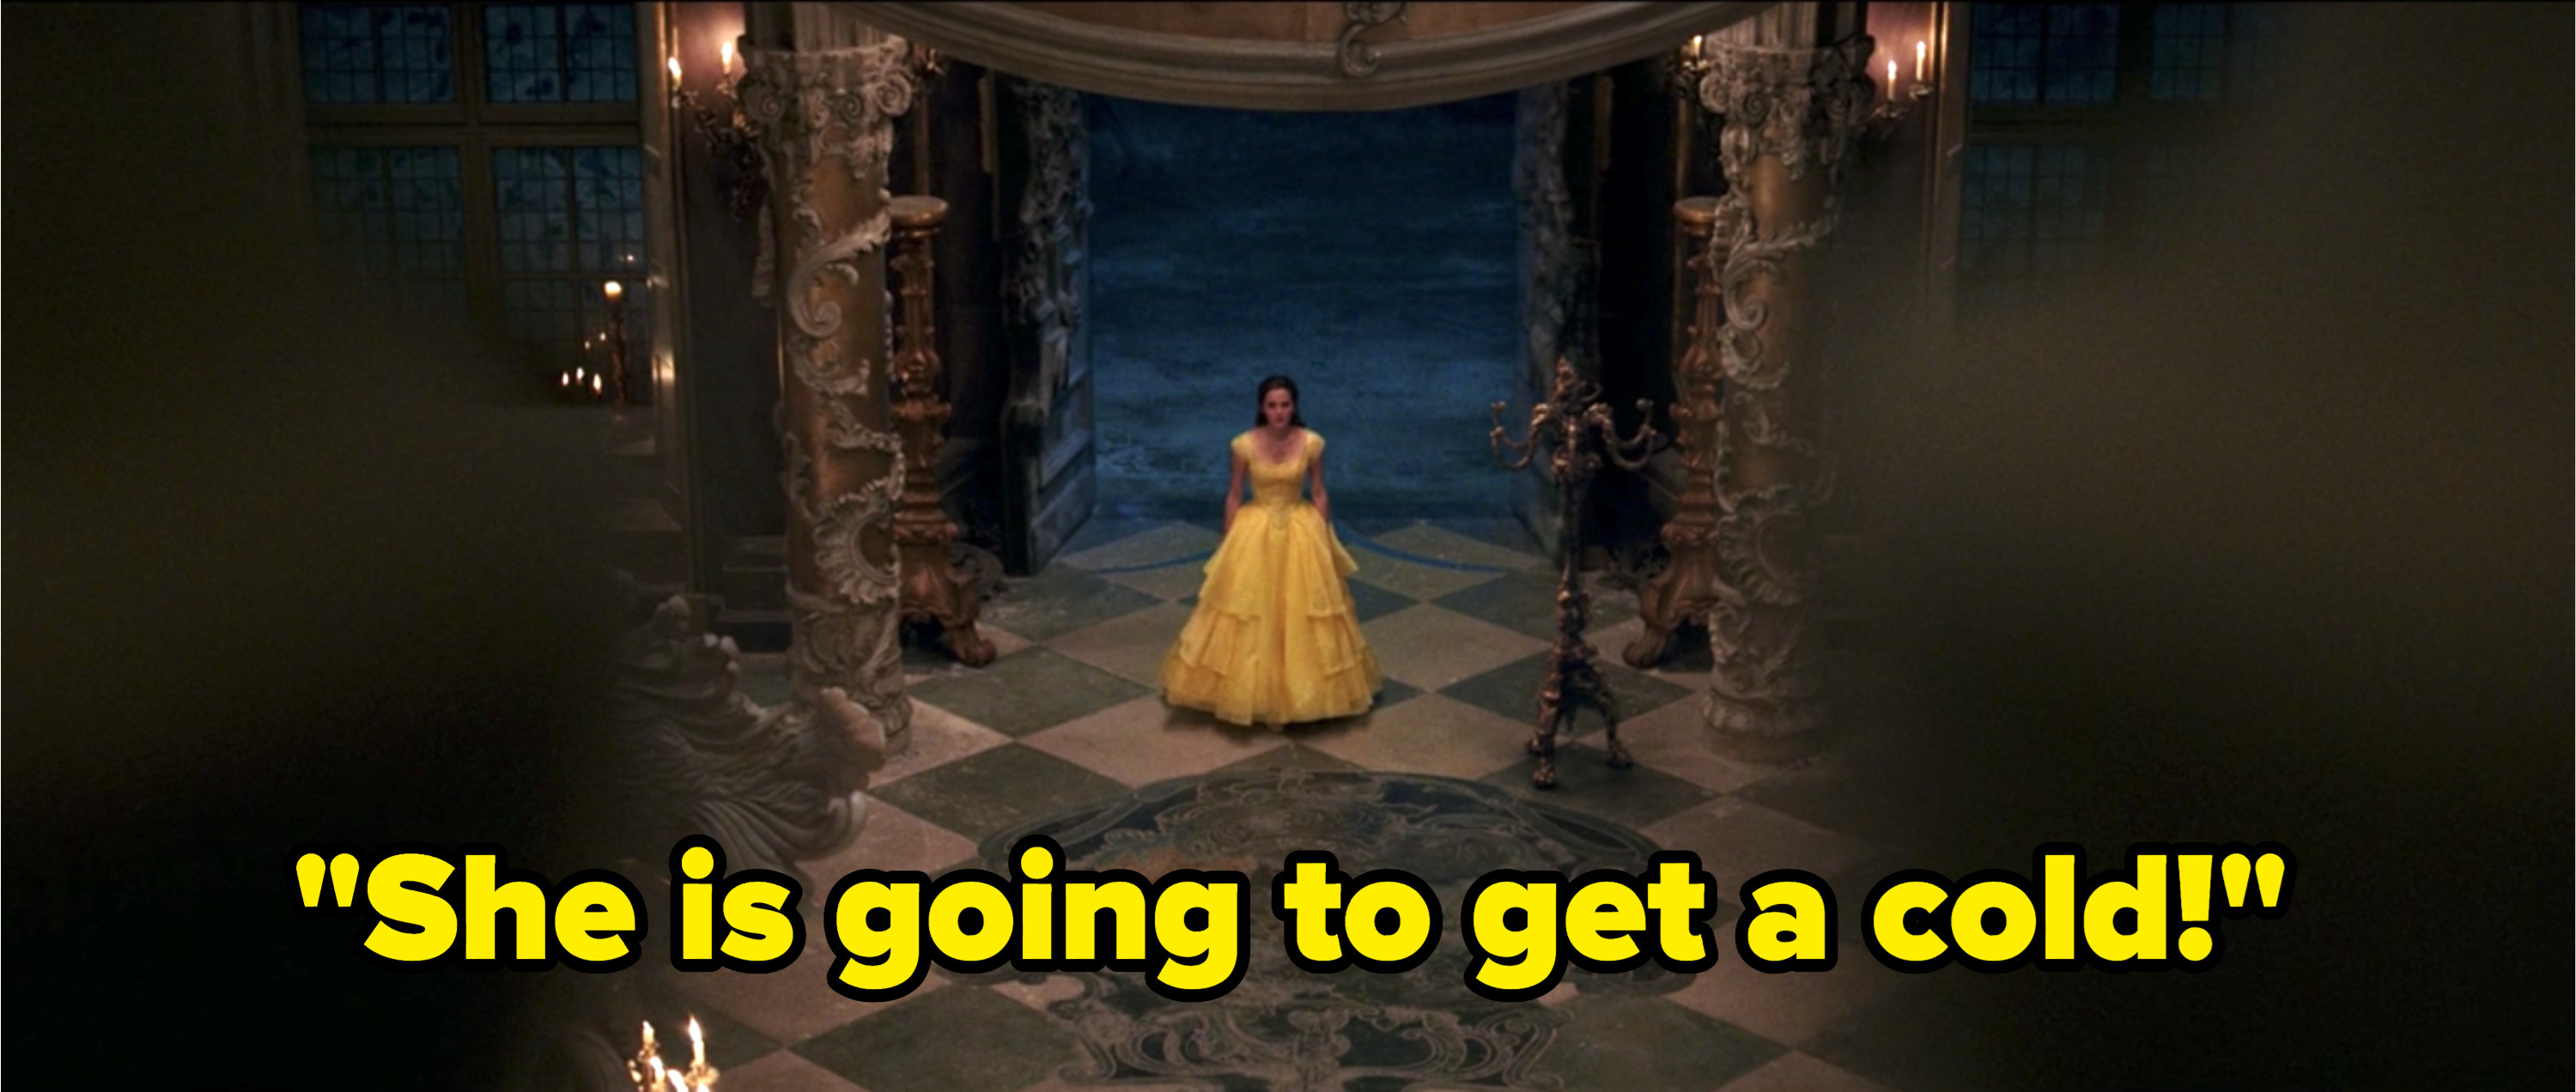 Belle leaving the castle in Beauty and the Beast with the caption &quot;She is going to get a cold.&quot;